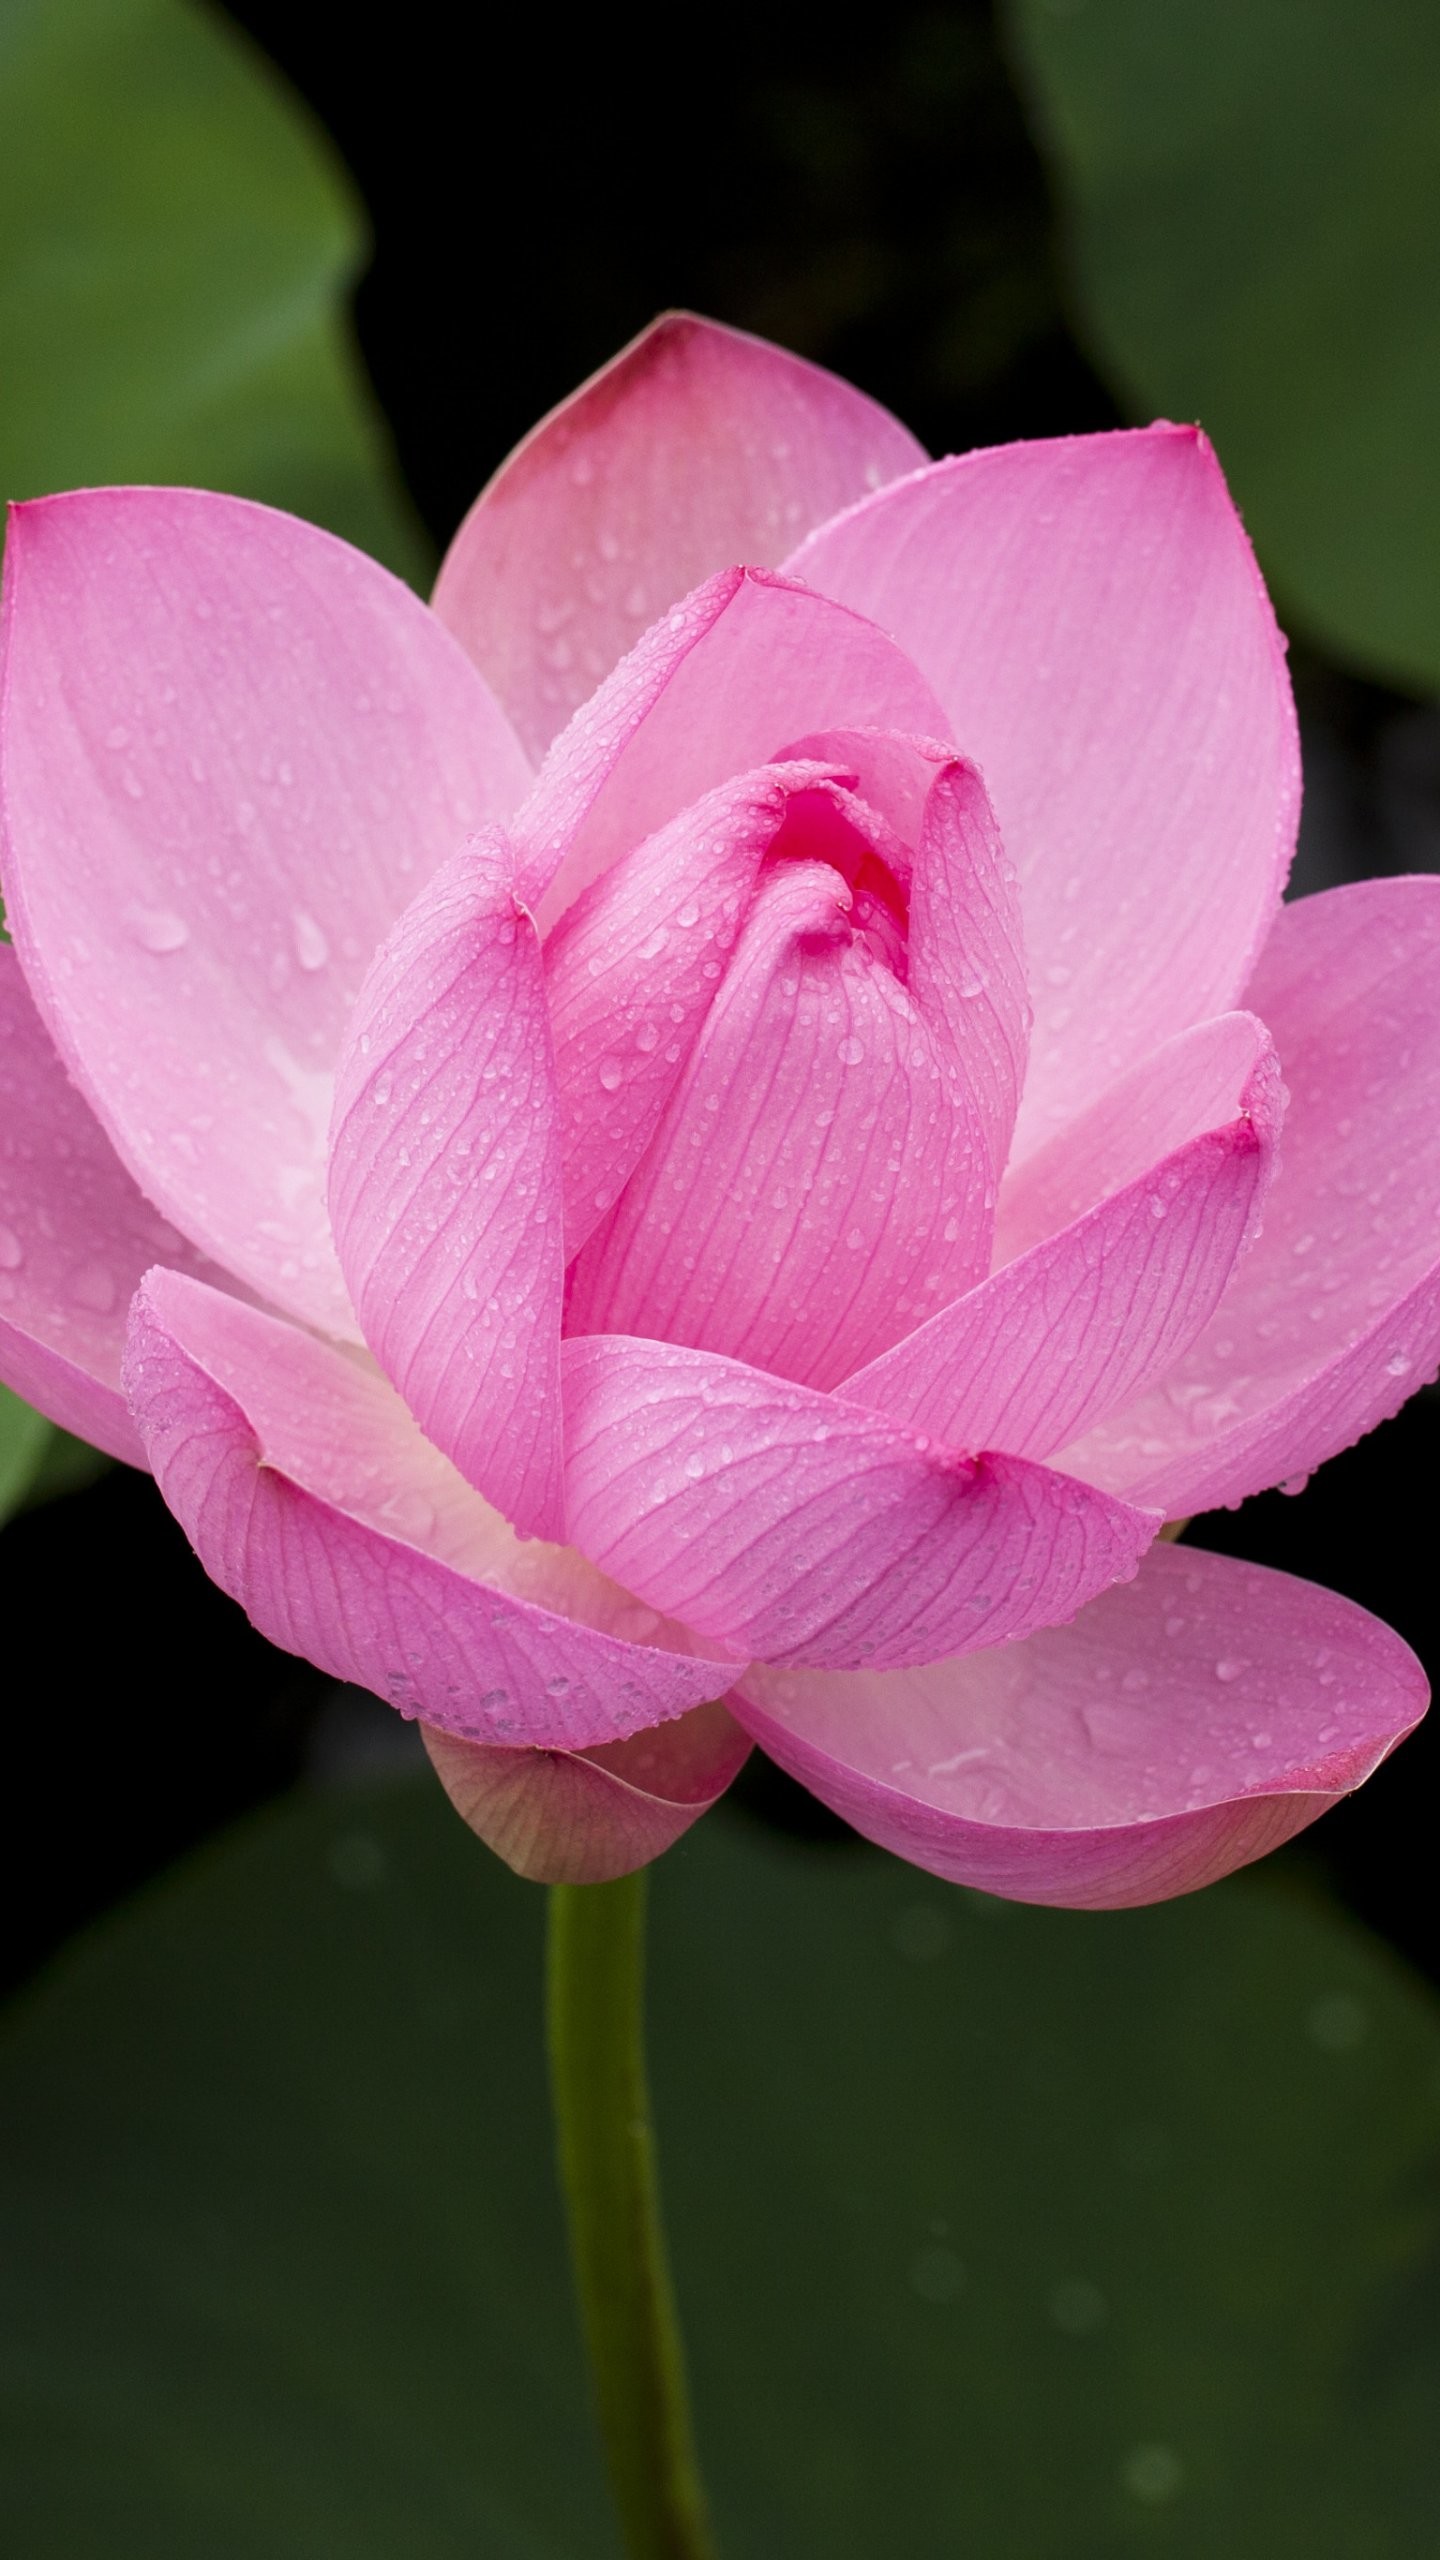 Lotus Flower Photos Download The BEST Free Lotus Flower Stock Photos  HD  Images